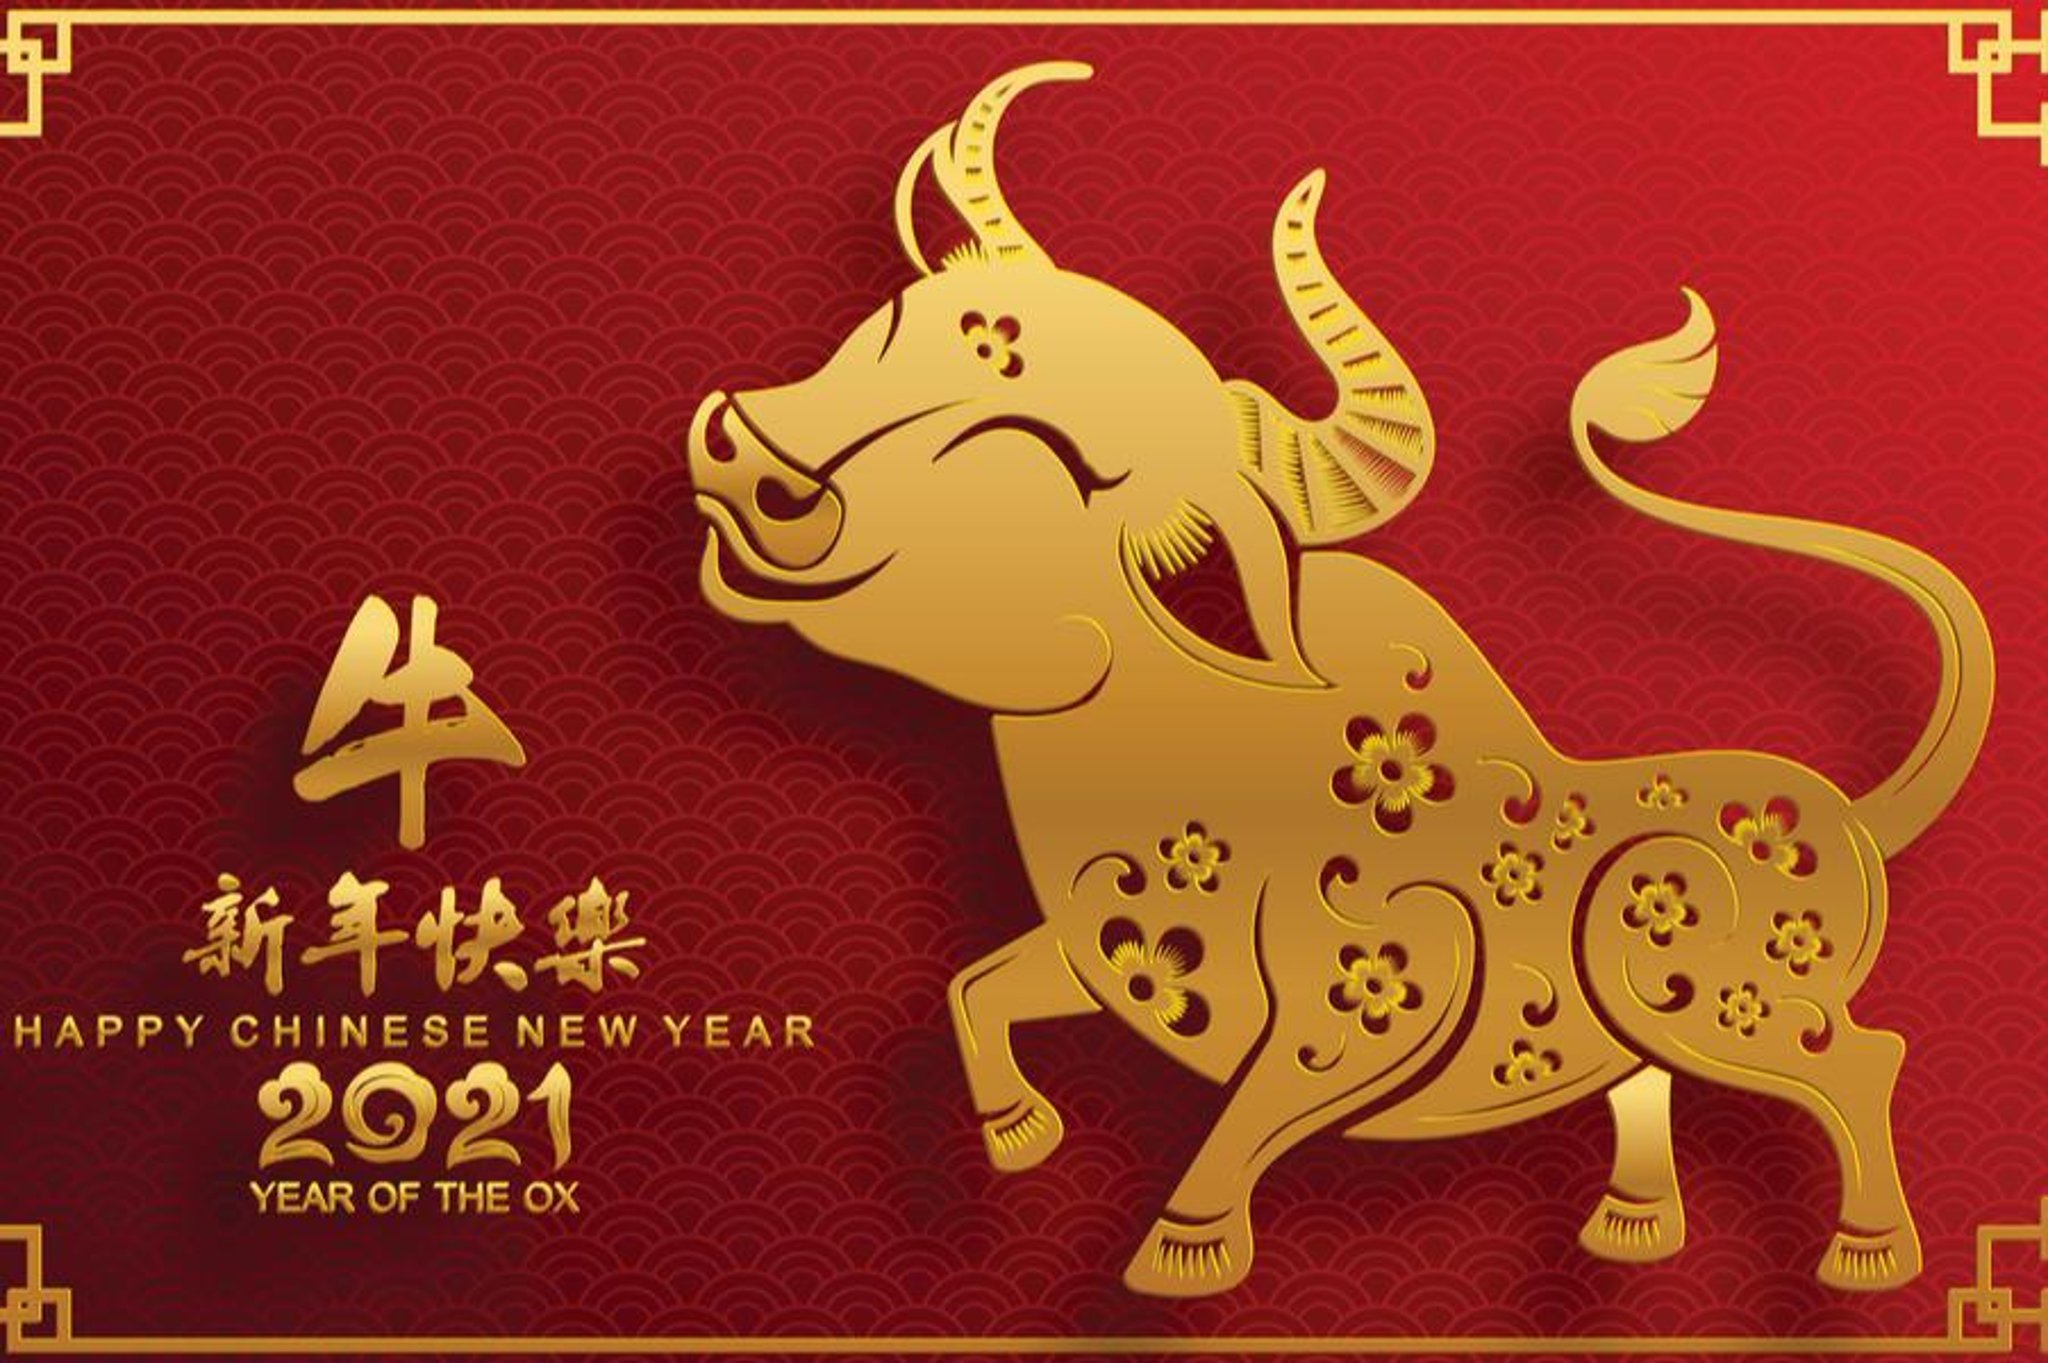 Chinese New Year 21 When Is The Lunar New Year What Does The Year Of The Ox Mean And Chinese Traditions The Scotsman